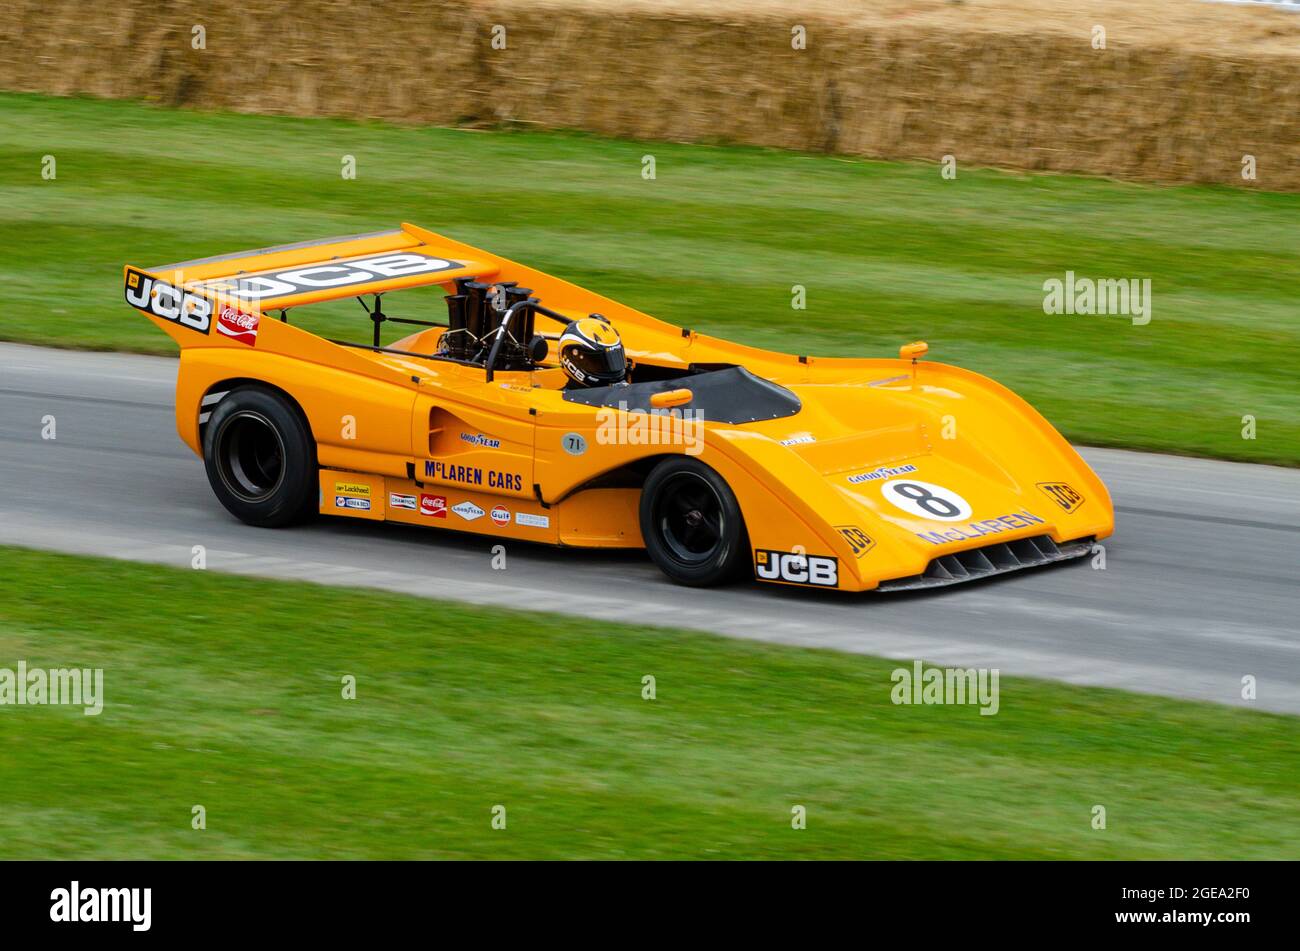 1971 Mclaren M8F at the Goodwood Festival of Speed motor racing event 2014. Developed for the 1971 Can-Am season powered by a Chevrolet V8 Stock Photo